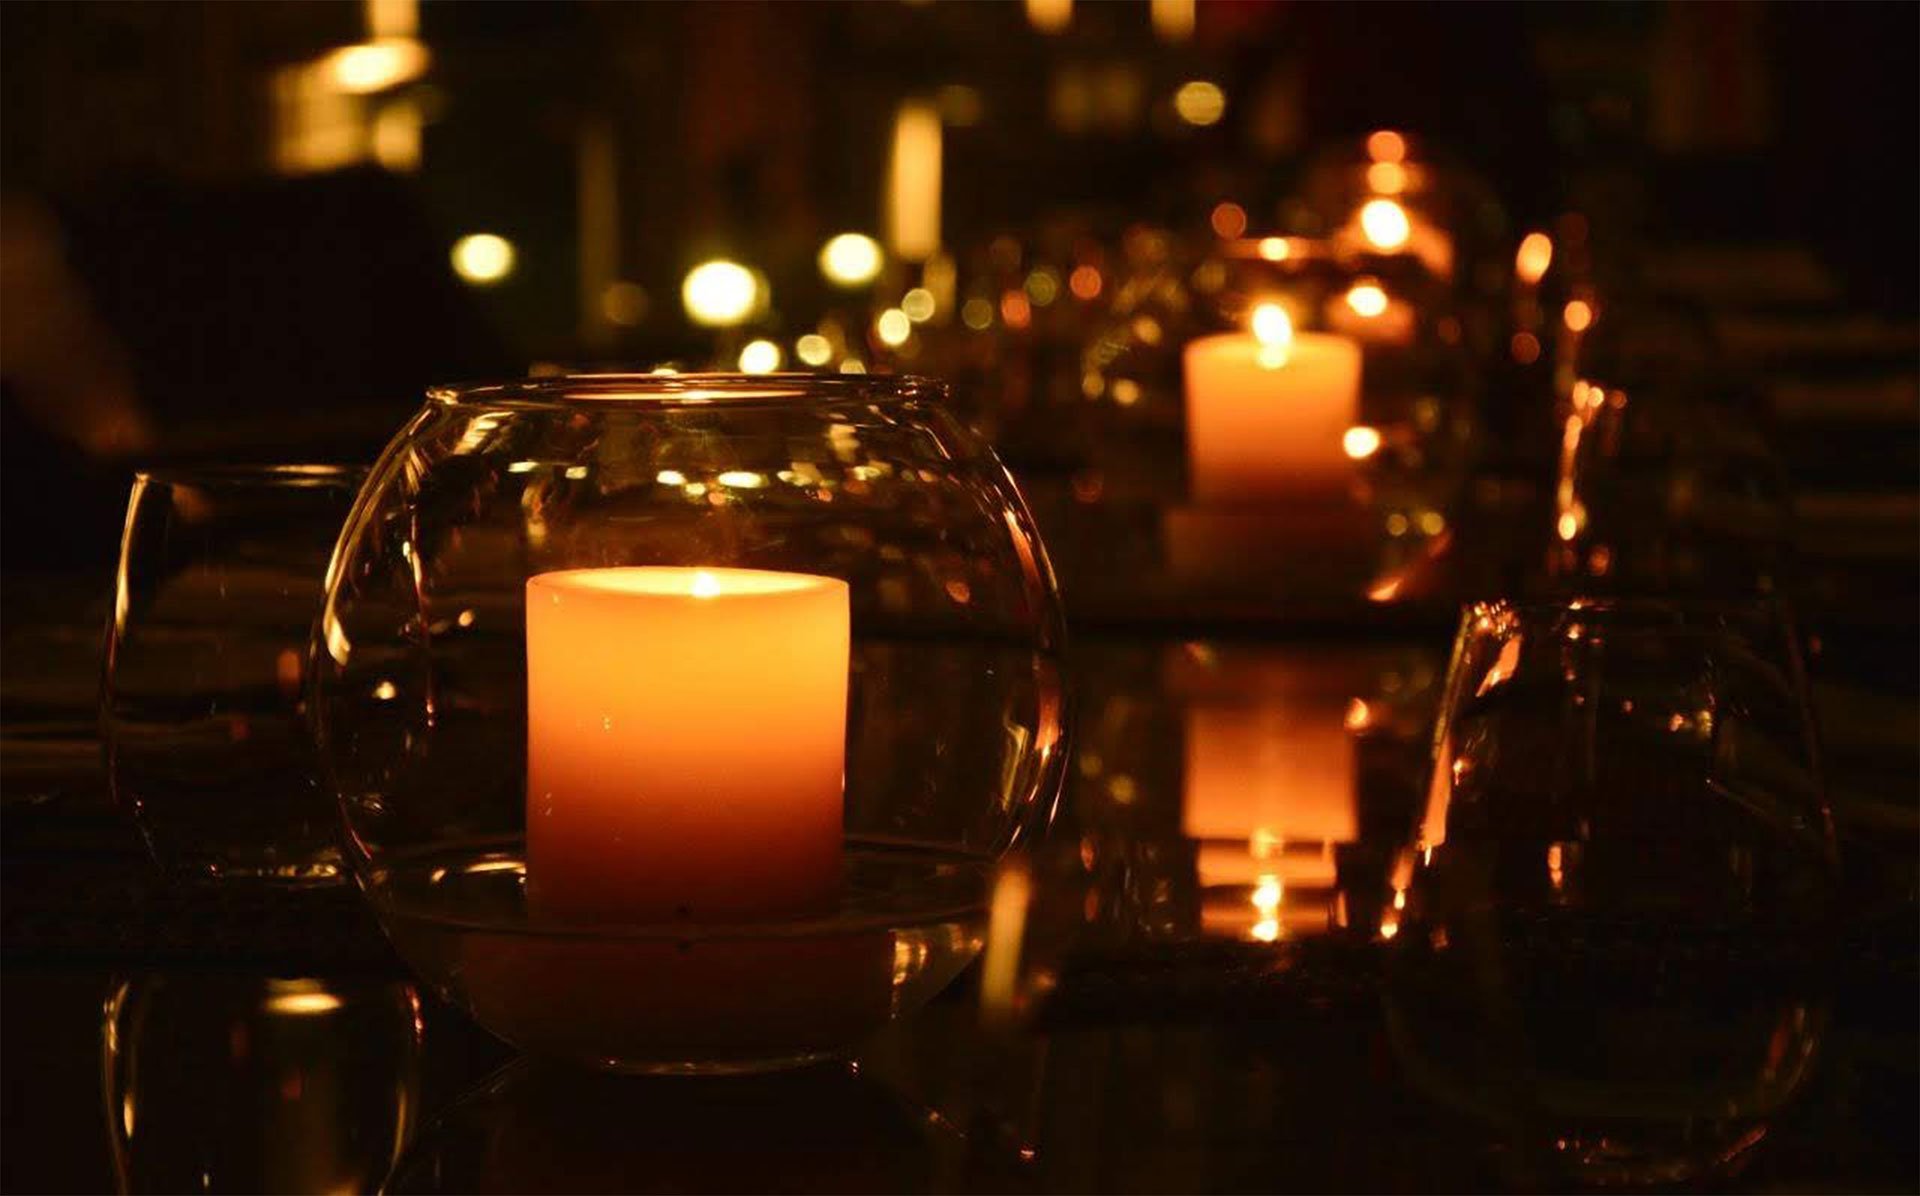 Candles in small glass holders on a long dinner table - Planning A Mystery Murder Dinner Event, Horton Events